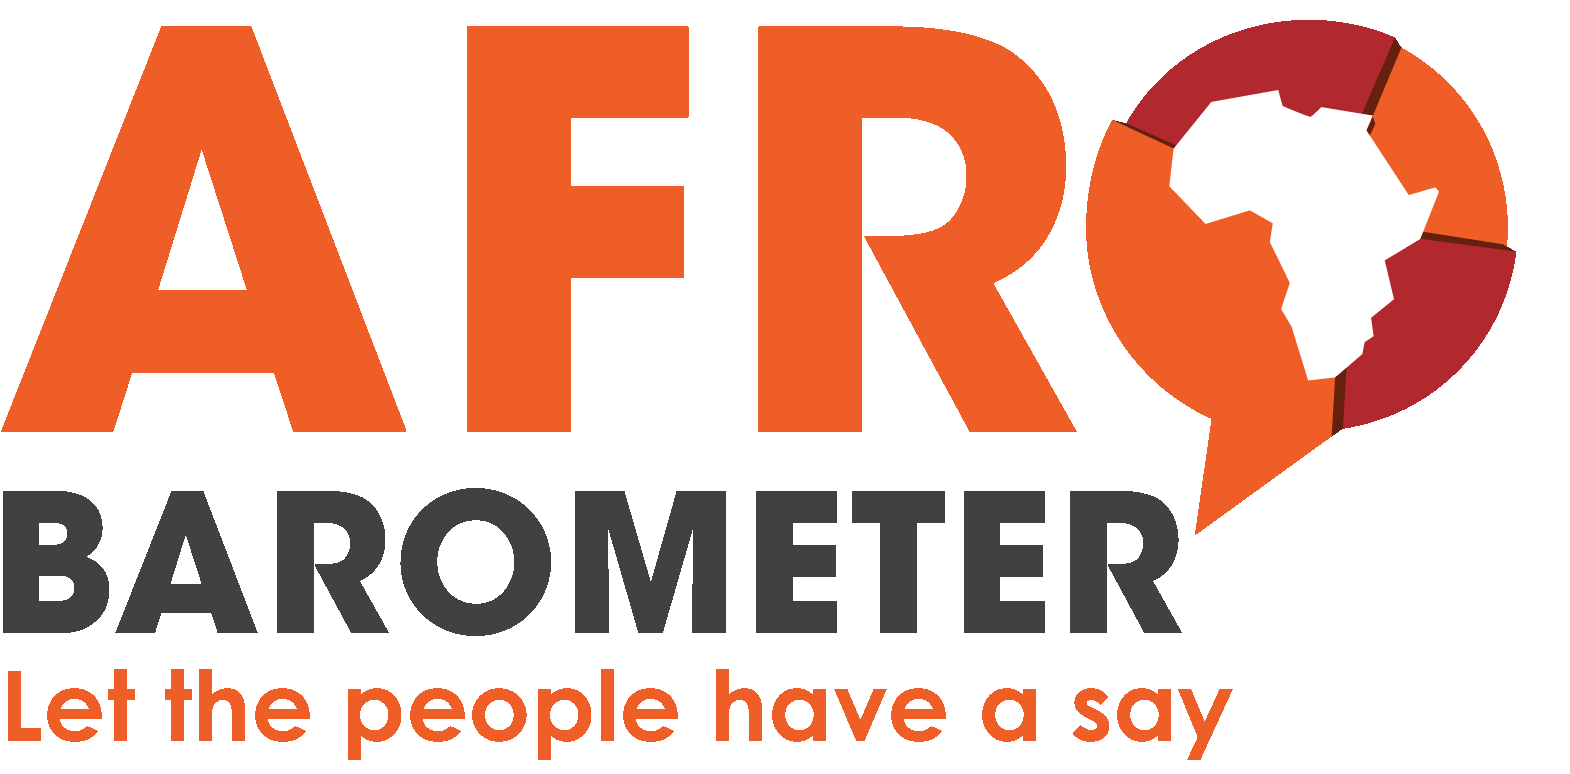 Logo: Afrobarometer, Afrobarometer is non-partisan, pan-African research institution conducting  public attitude surveys on democracy, governance, the economy and society in 30+ countries repeated on a regular cycle.